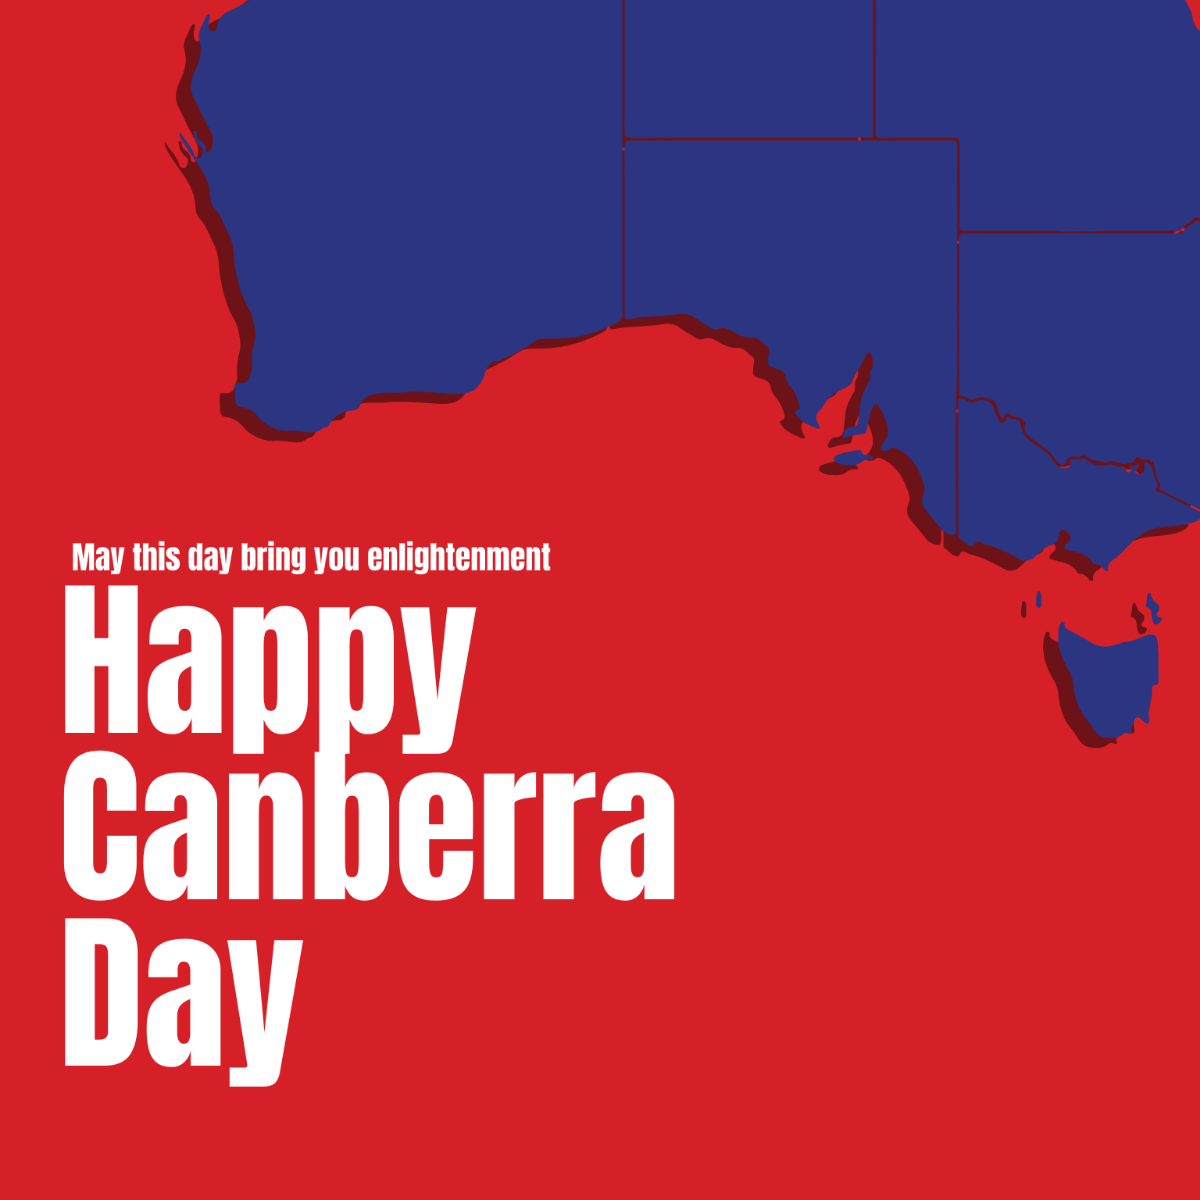 Free Canberra Day Greeting Card Vector Template